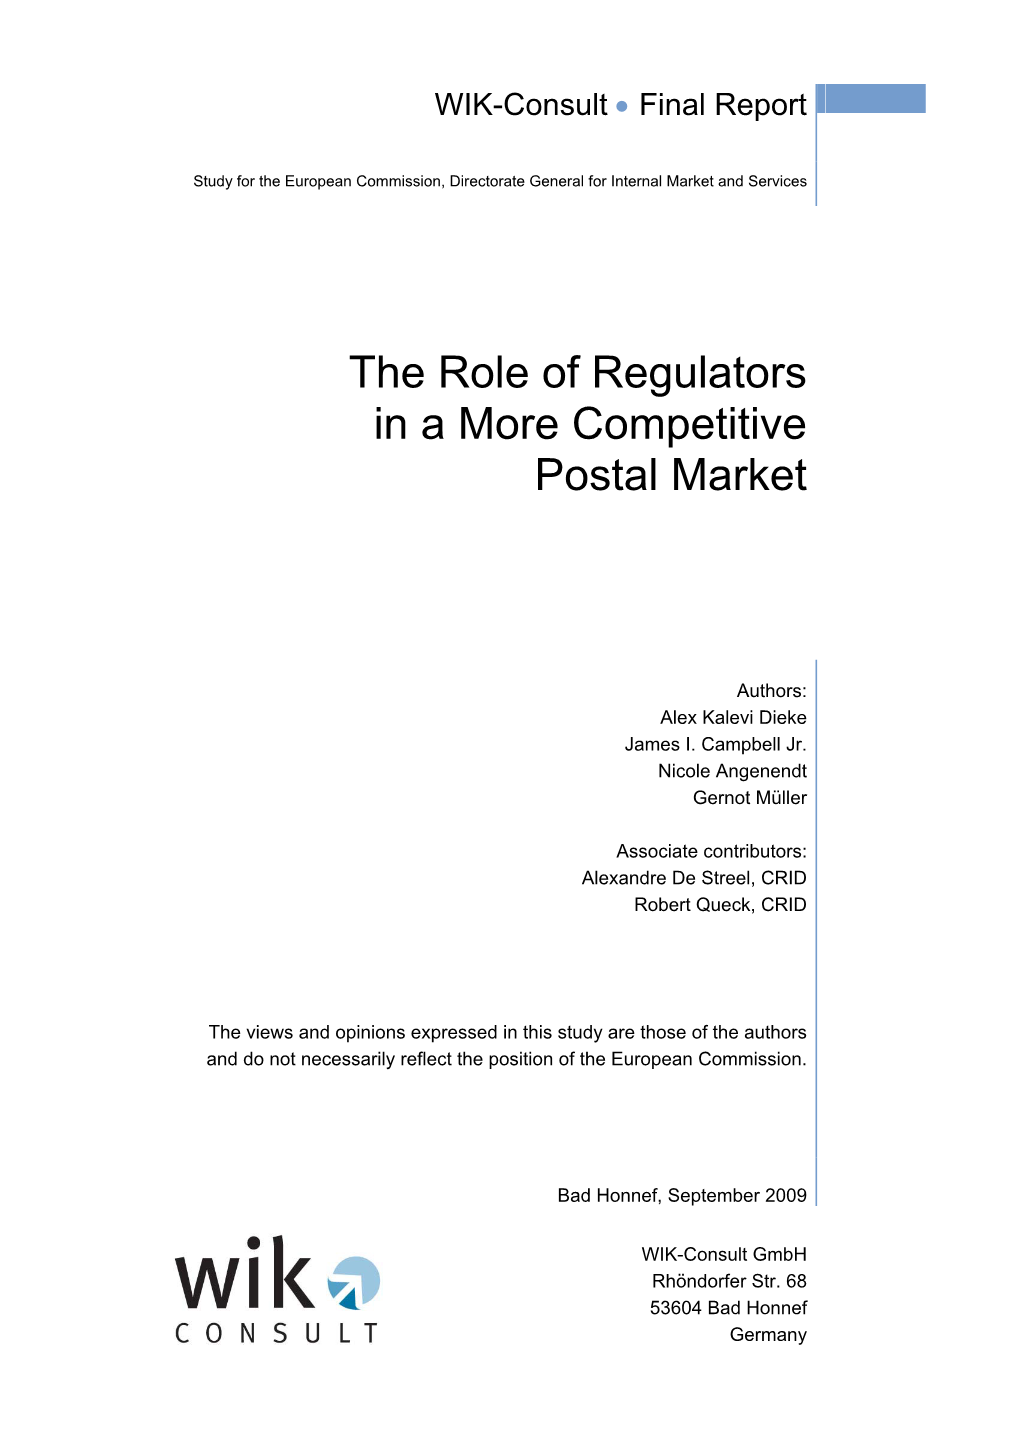 The Role of Regulators in a More Competitive Postal Market